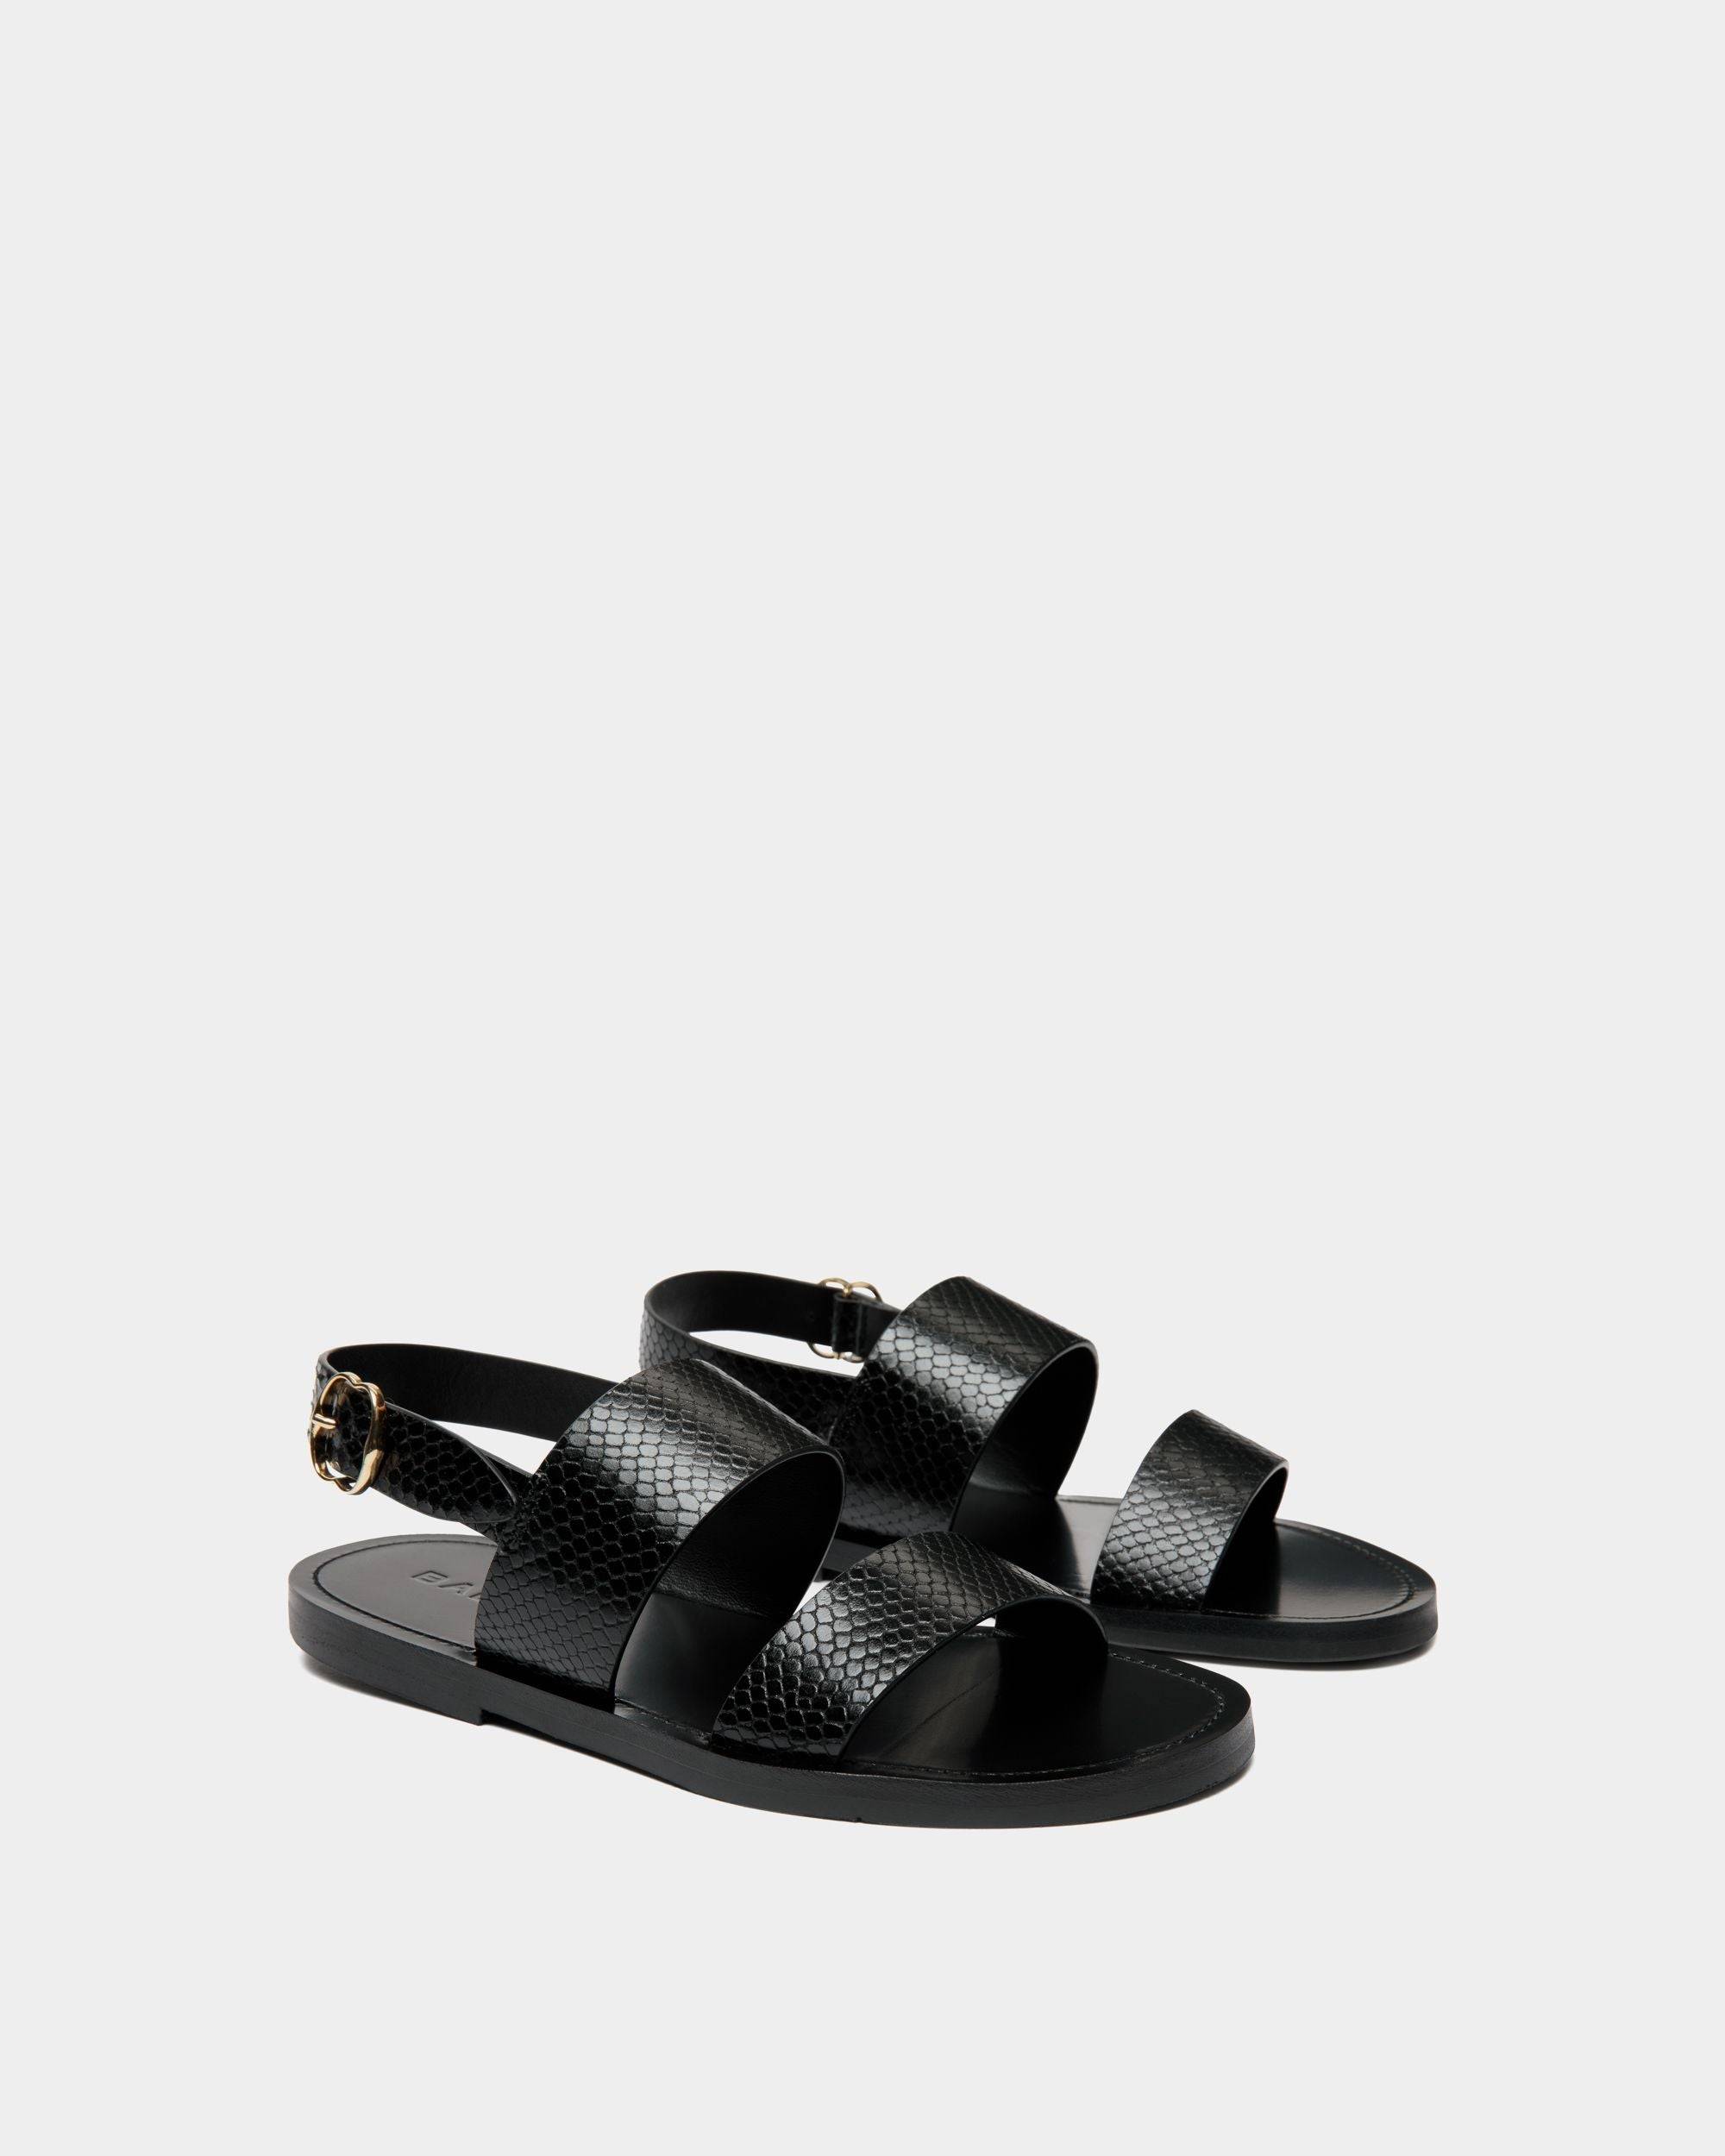 Baudy | Women's Flat Sandal in Black Python Printed Leather | Bally | Still Life 3/4 Front